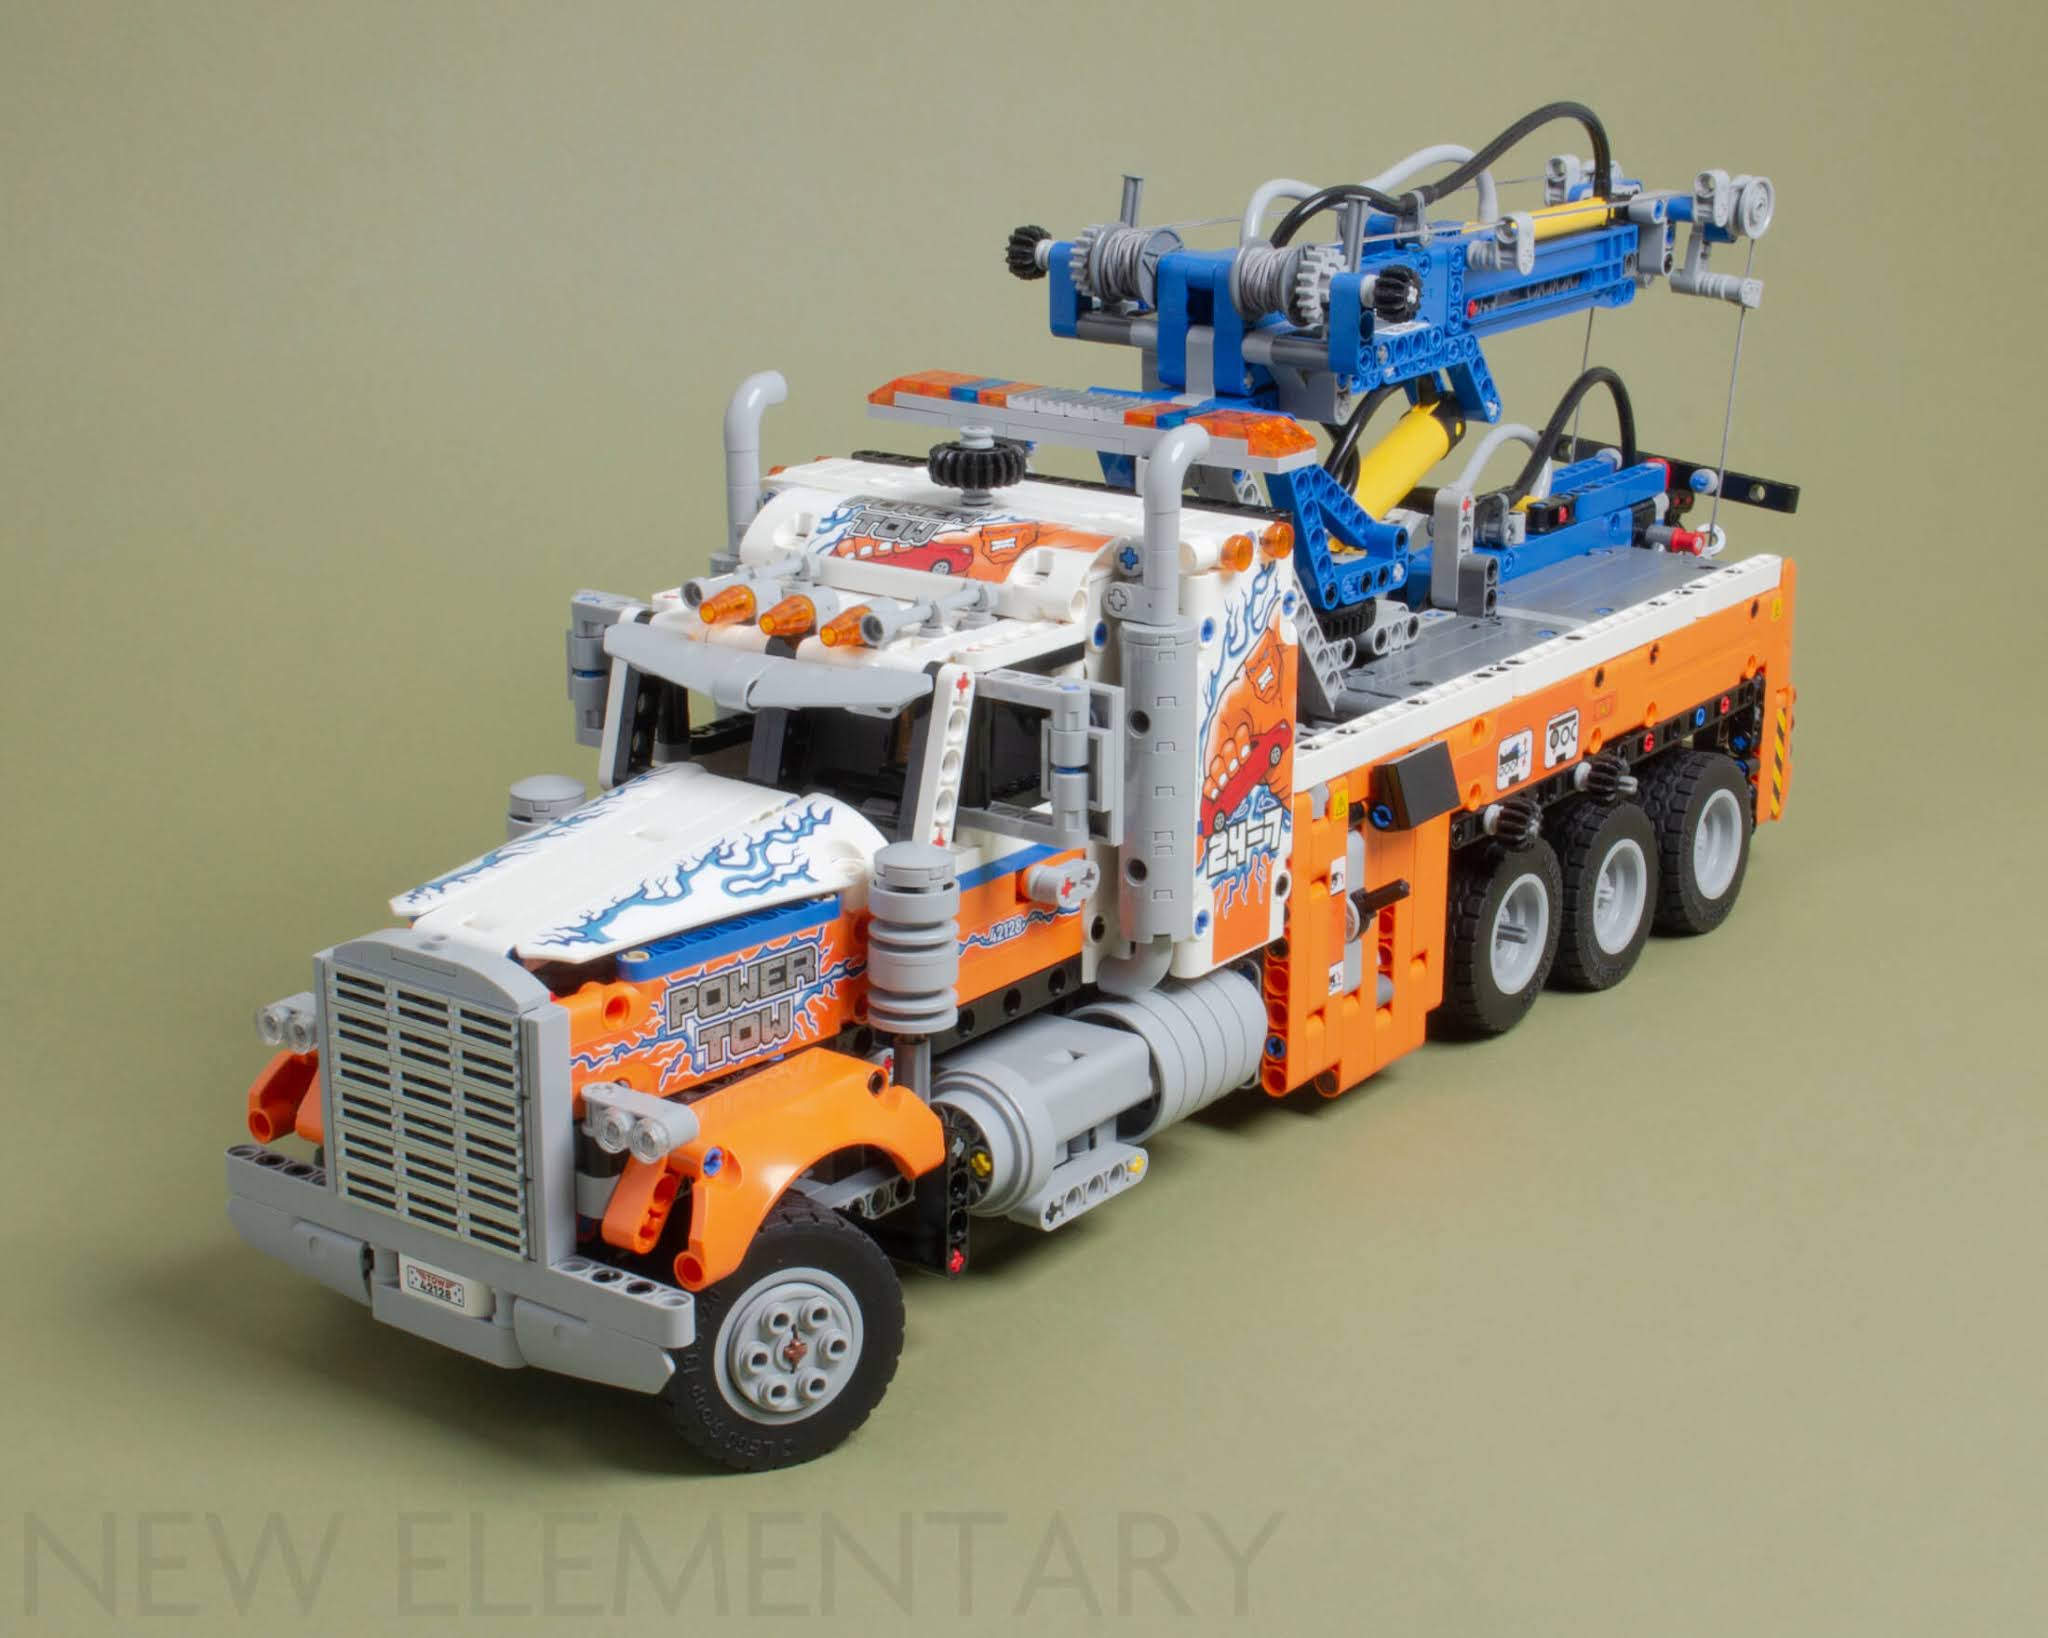 LEGO® Technic review: 42128 Truck | New Elementary: parts, sets and techniques